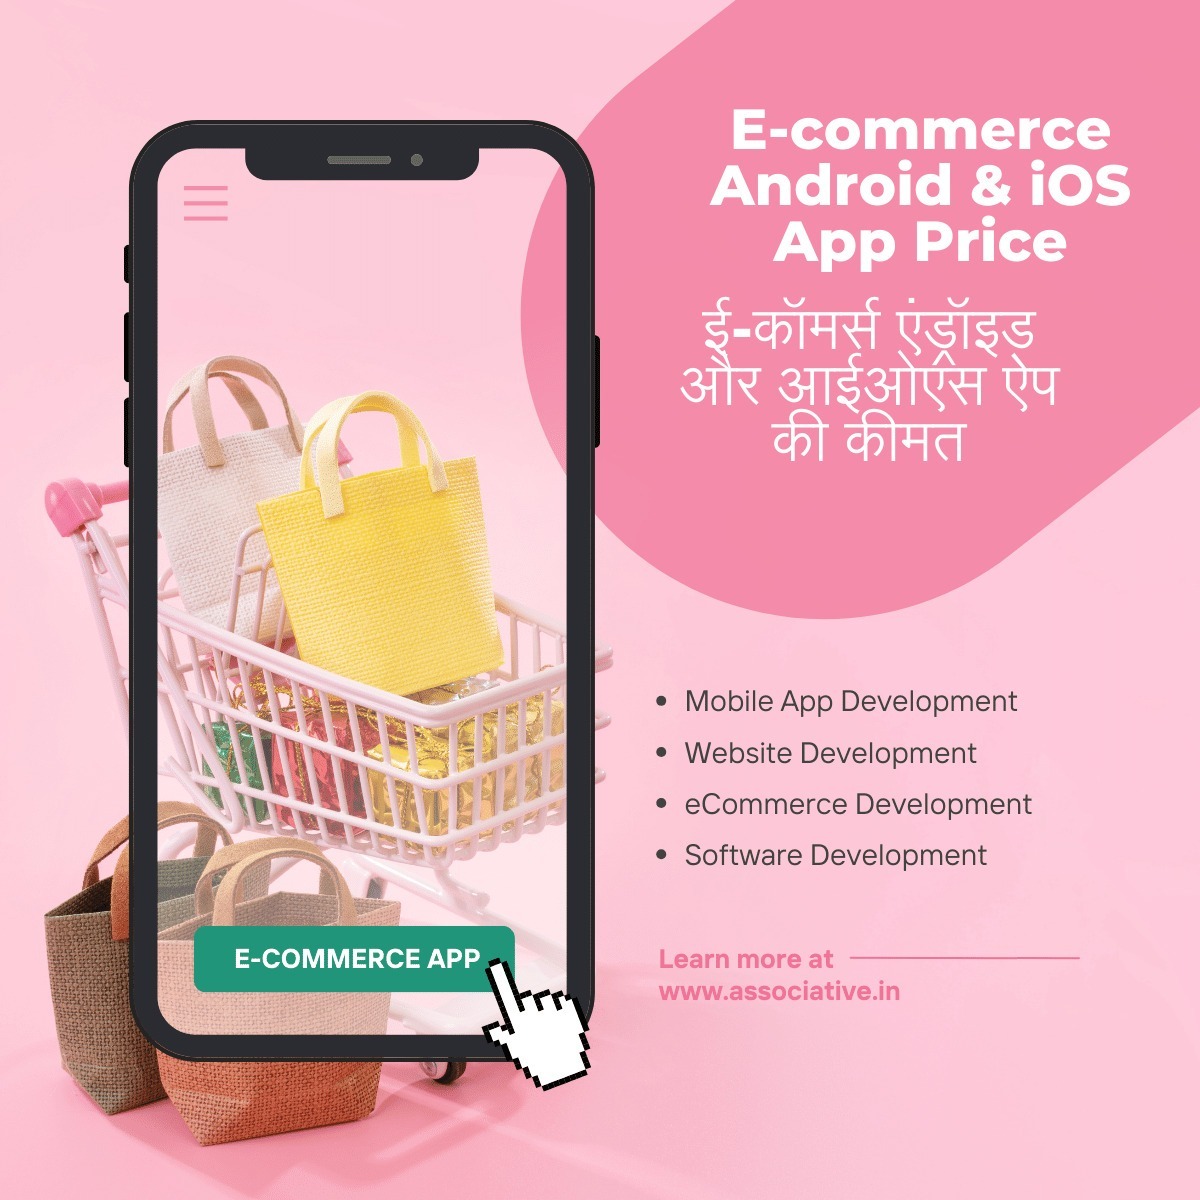 E-commerce Android & iOS App Price

E-commerce Android & iOS App Price